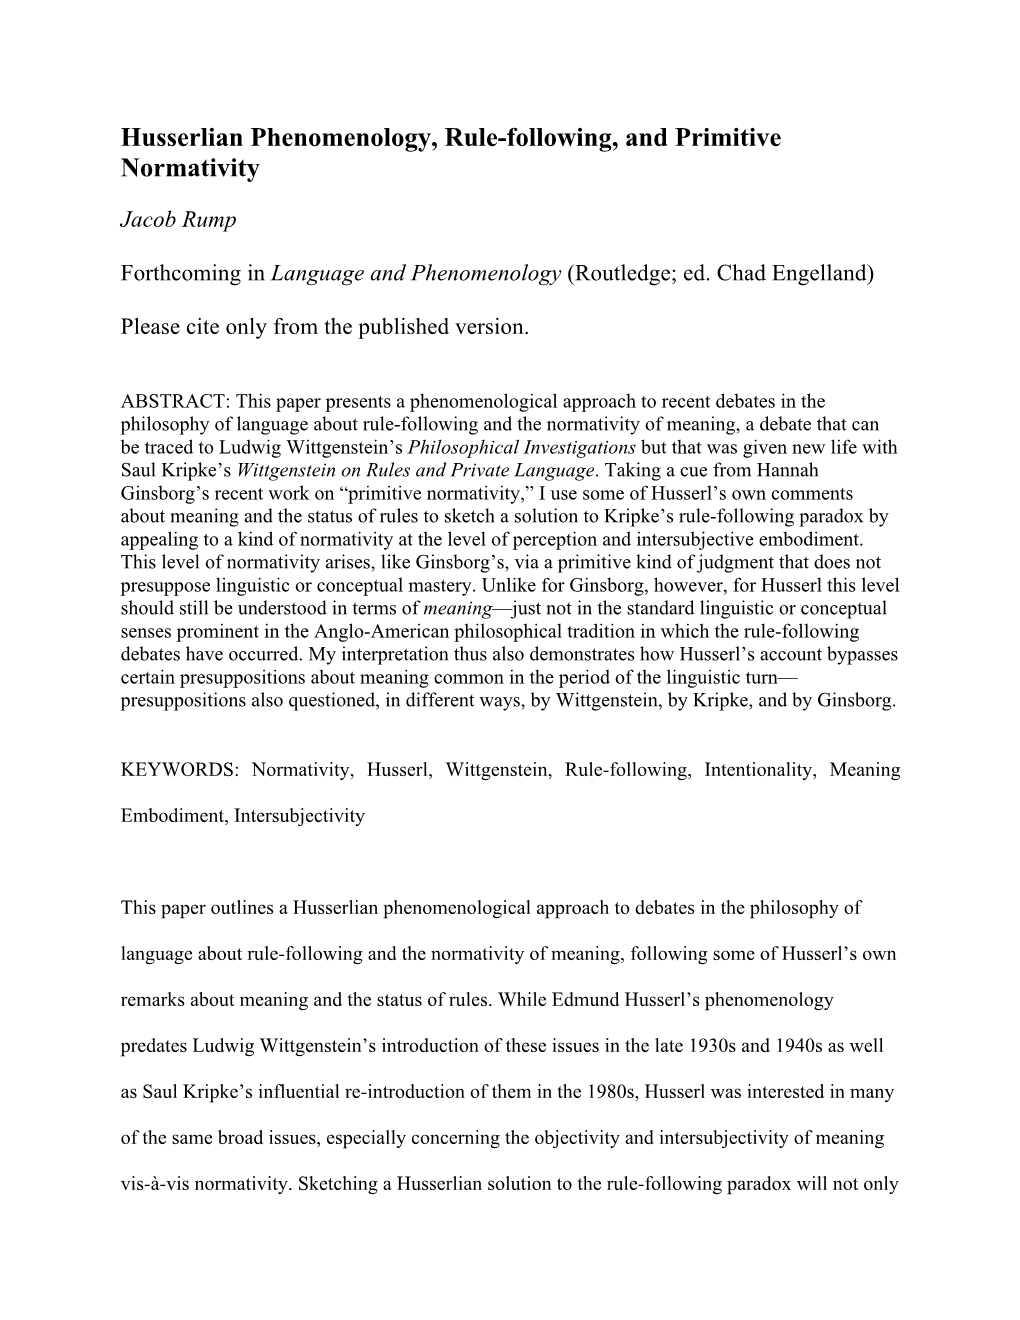 Husserlian Phenomenology, Rule-Following, and Primitive Normativity